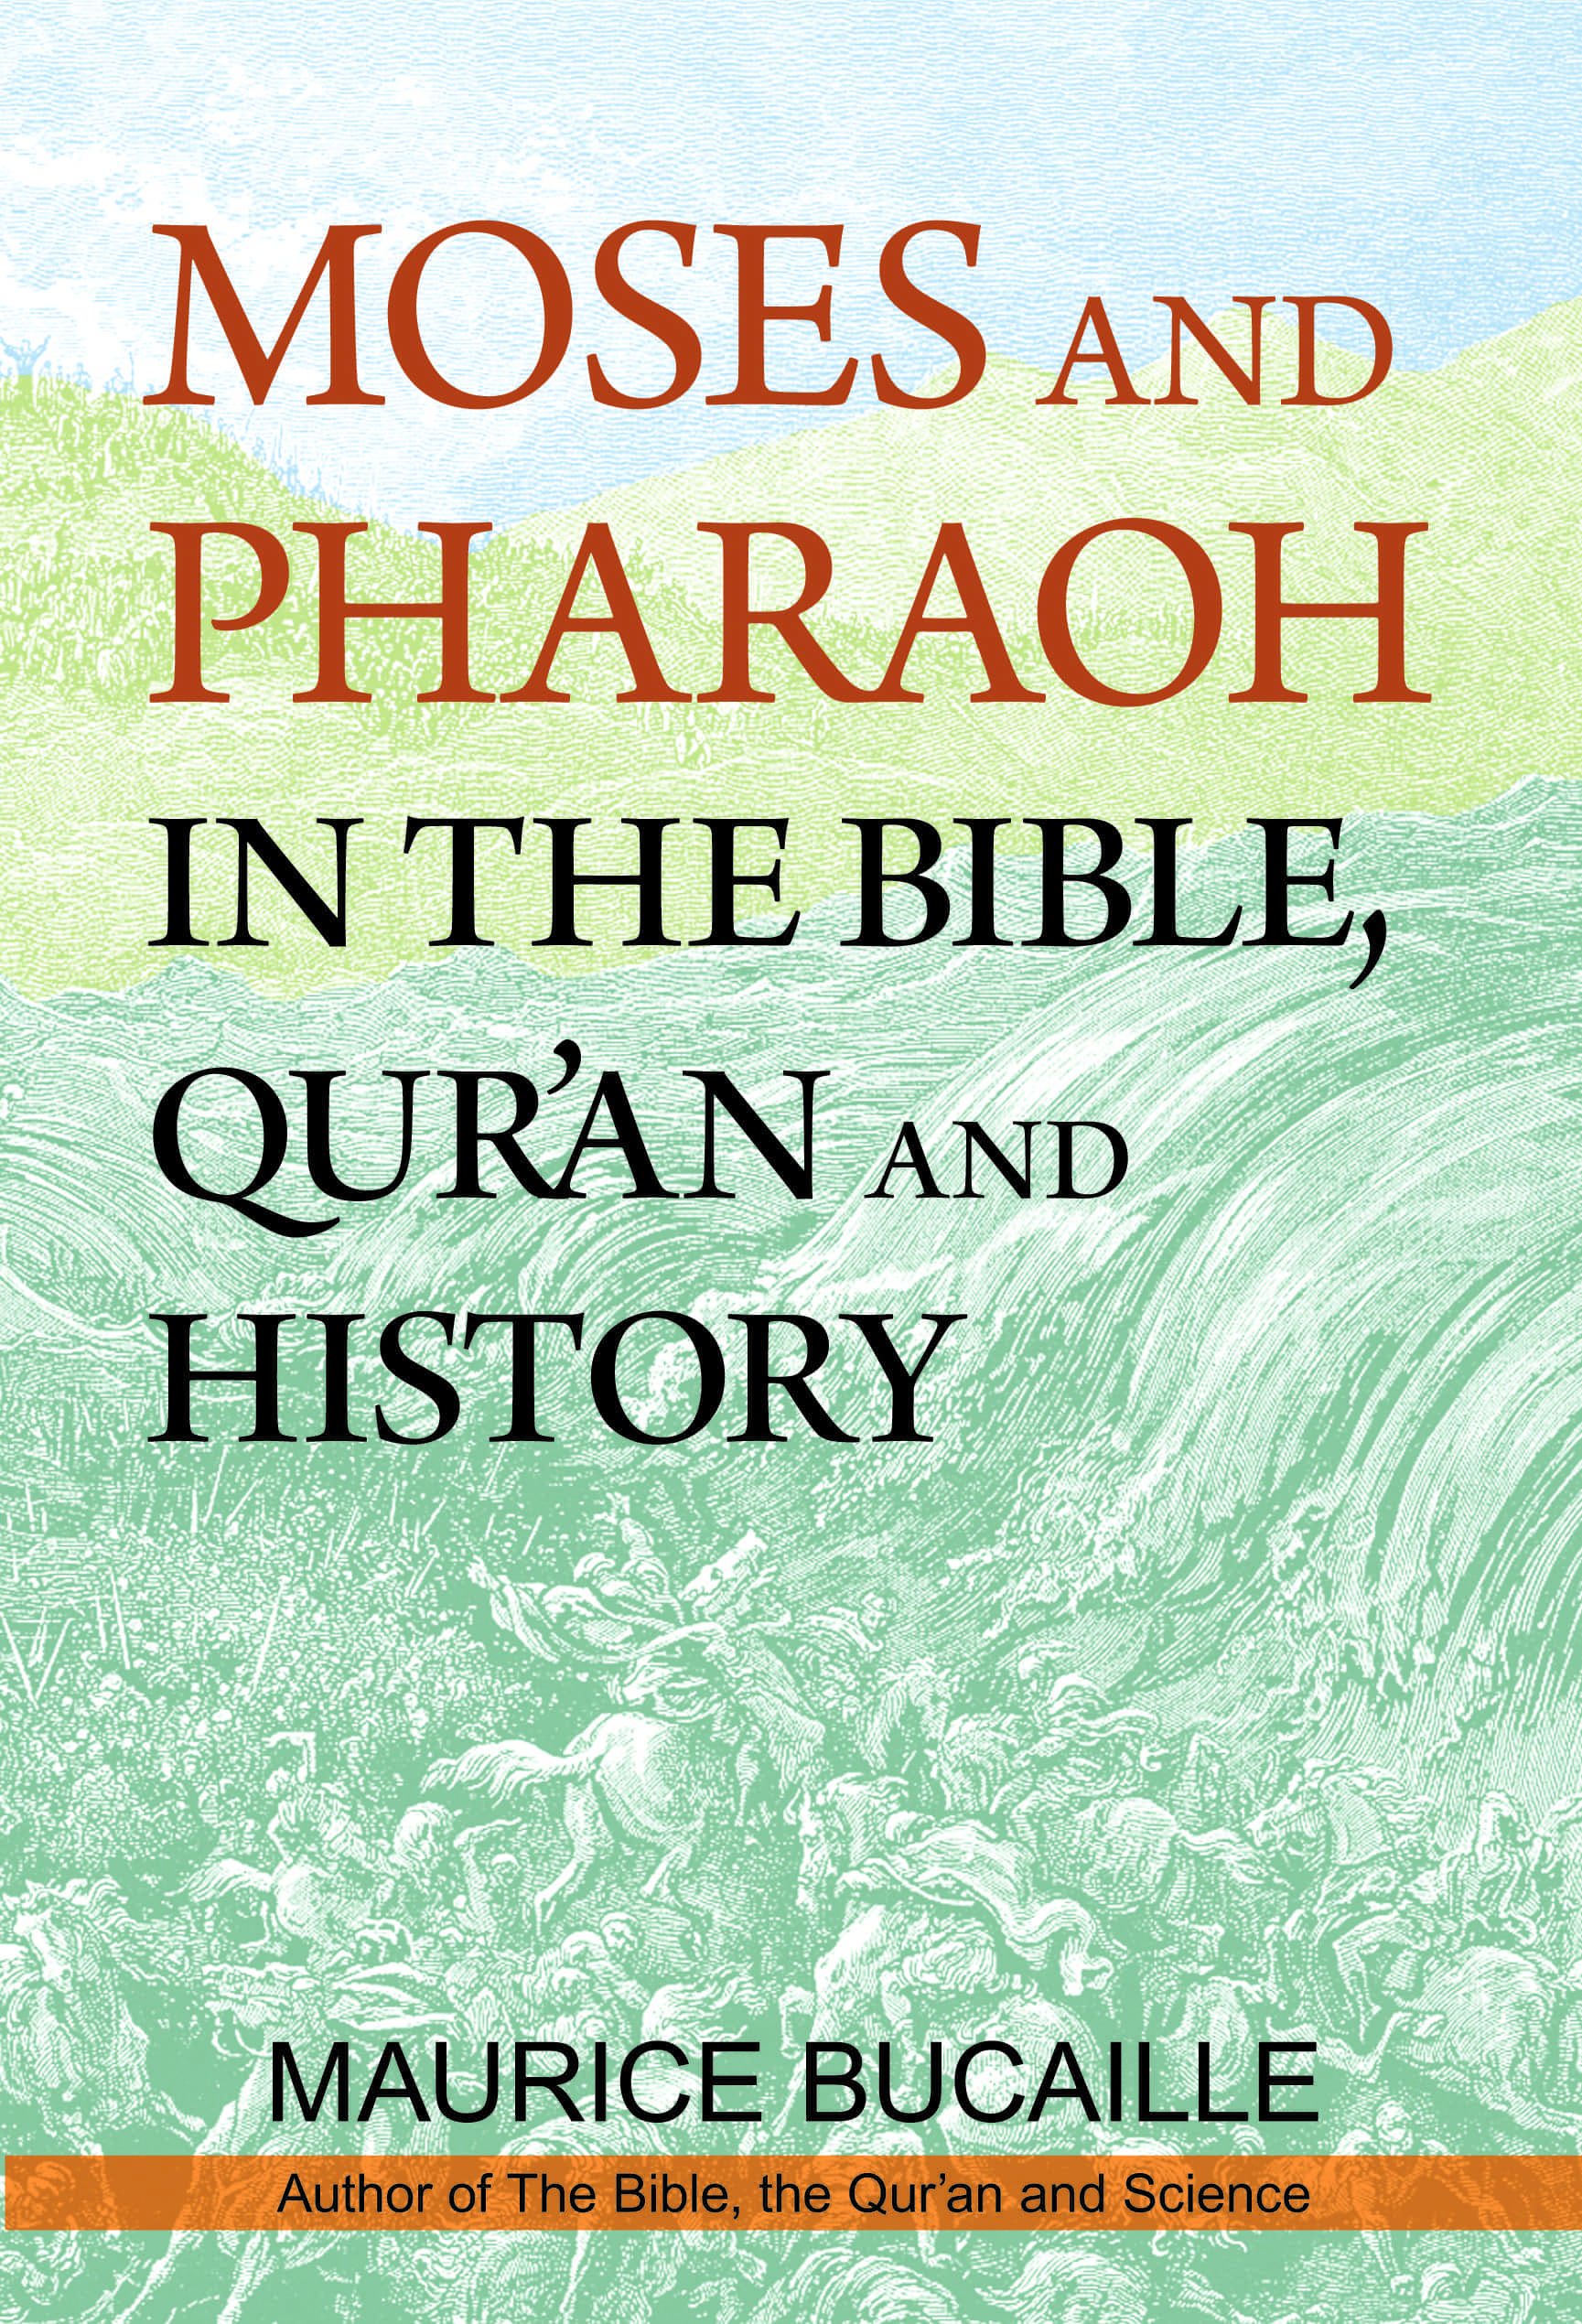 Moses and Pharaoh in the Bible, Qur'an and History